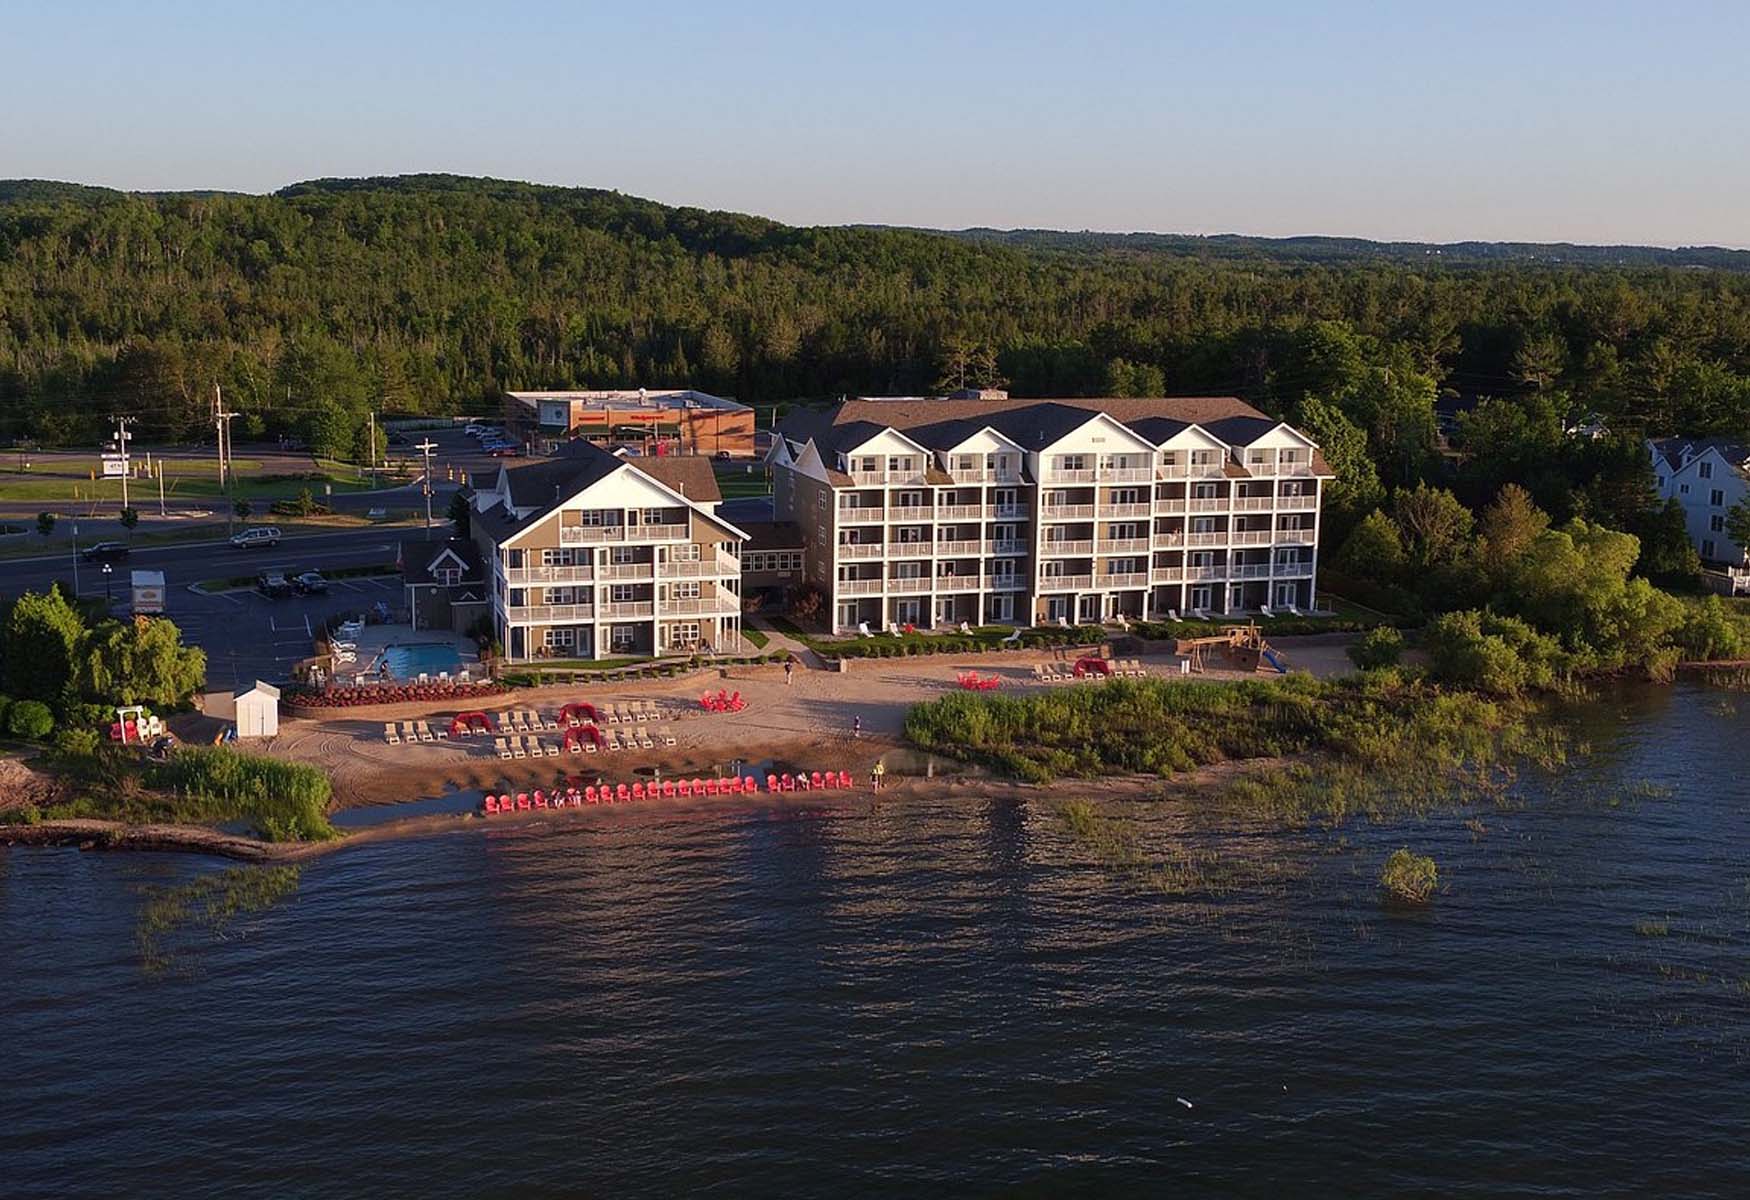 Where To Stay In Traverse City?